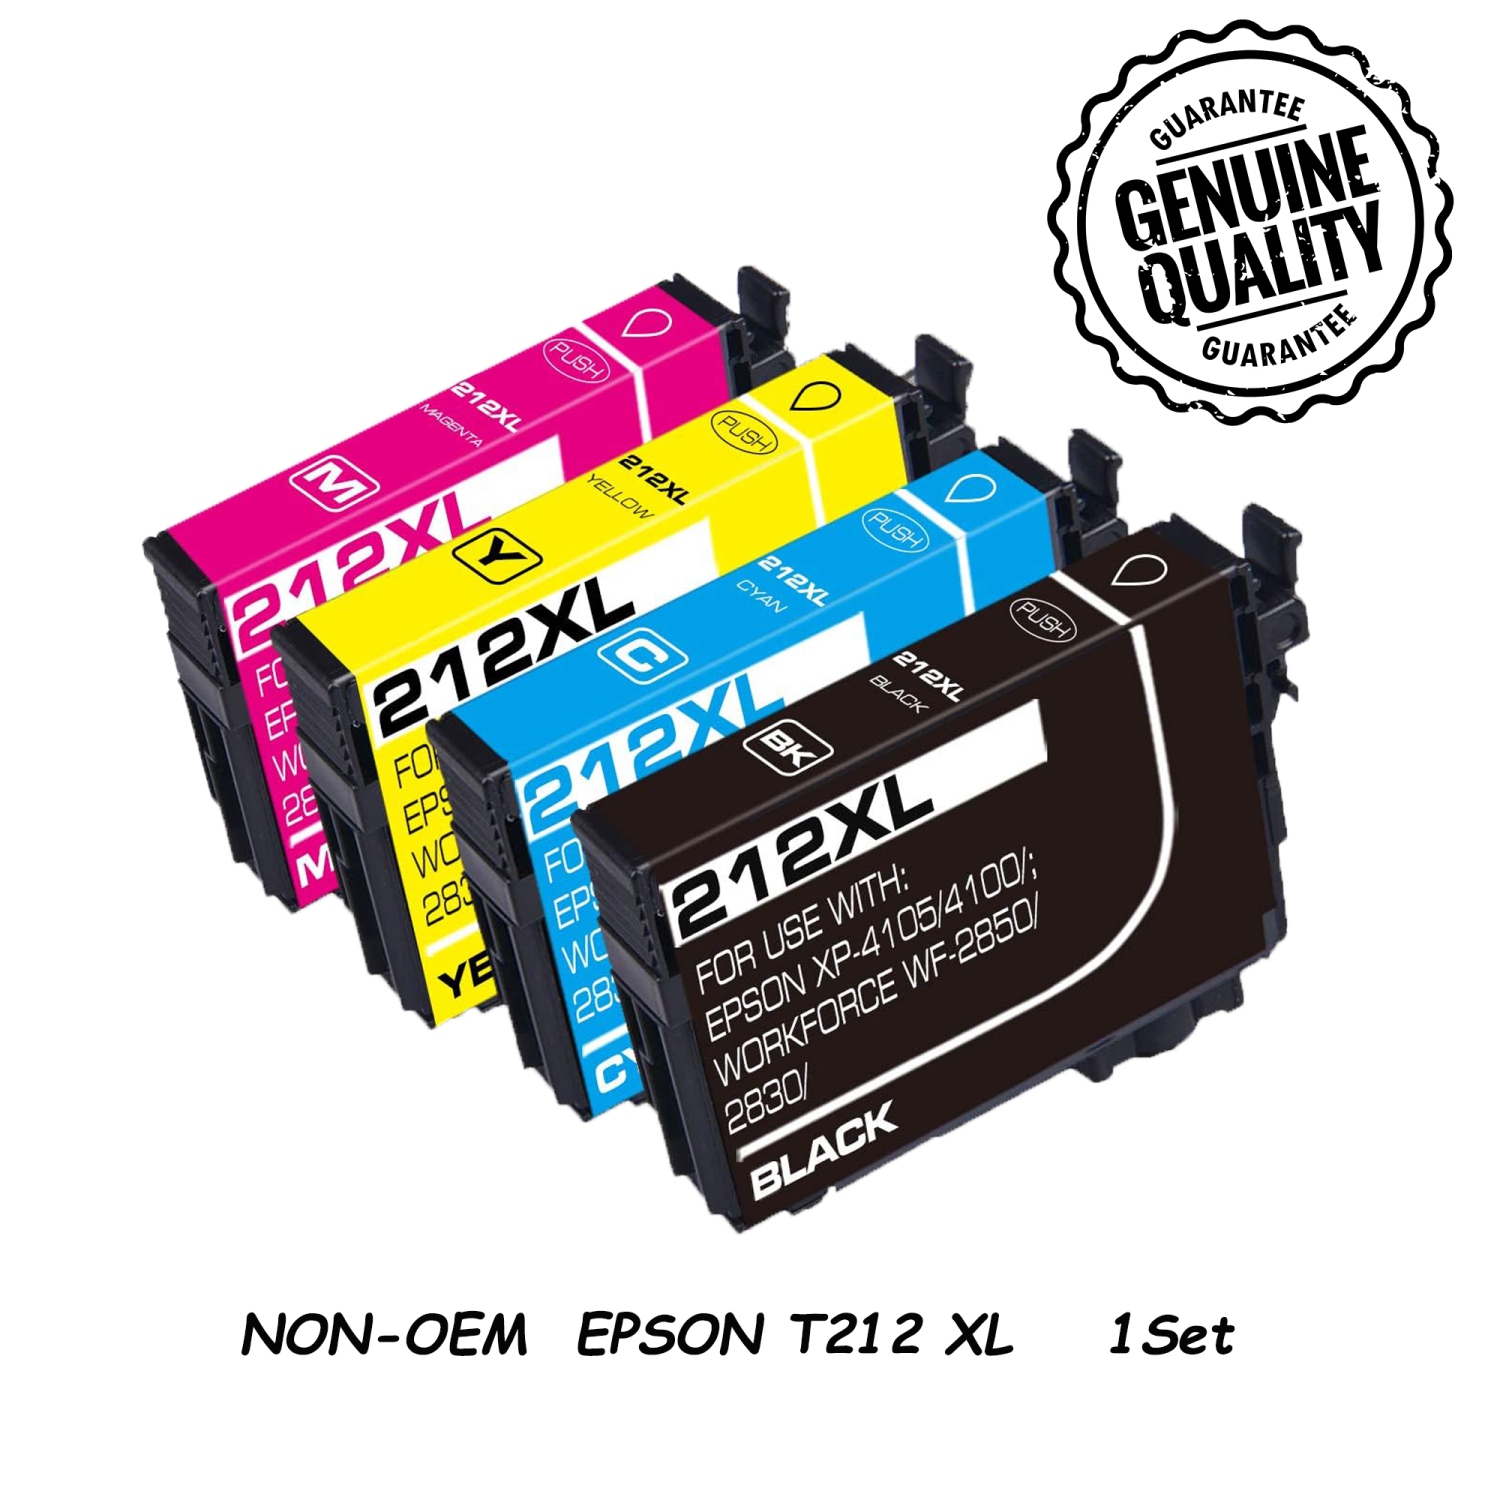 [New Chip] 1Set Compatible Ink Cartridge Replacement for Epson T212 212 XL to use with Expression Home XP-4100 , EpsonWorkForce WF-2830 , WorkForce WF-2850